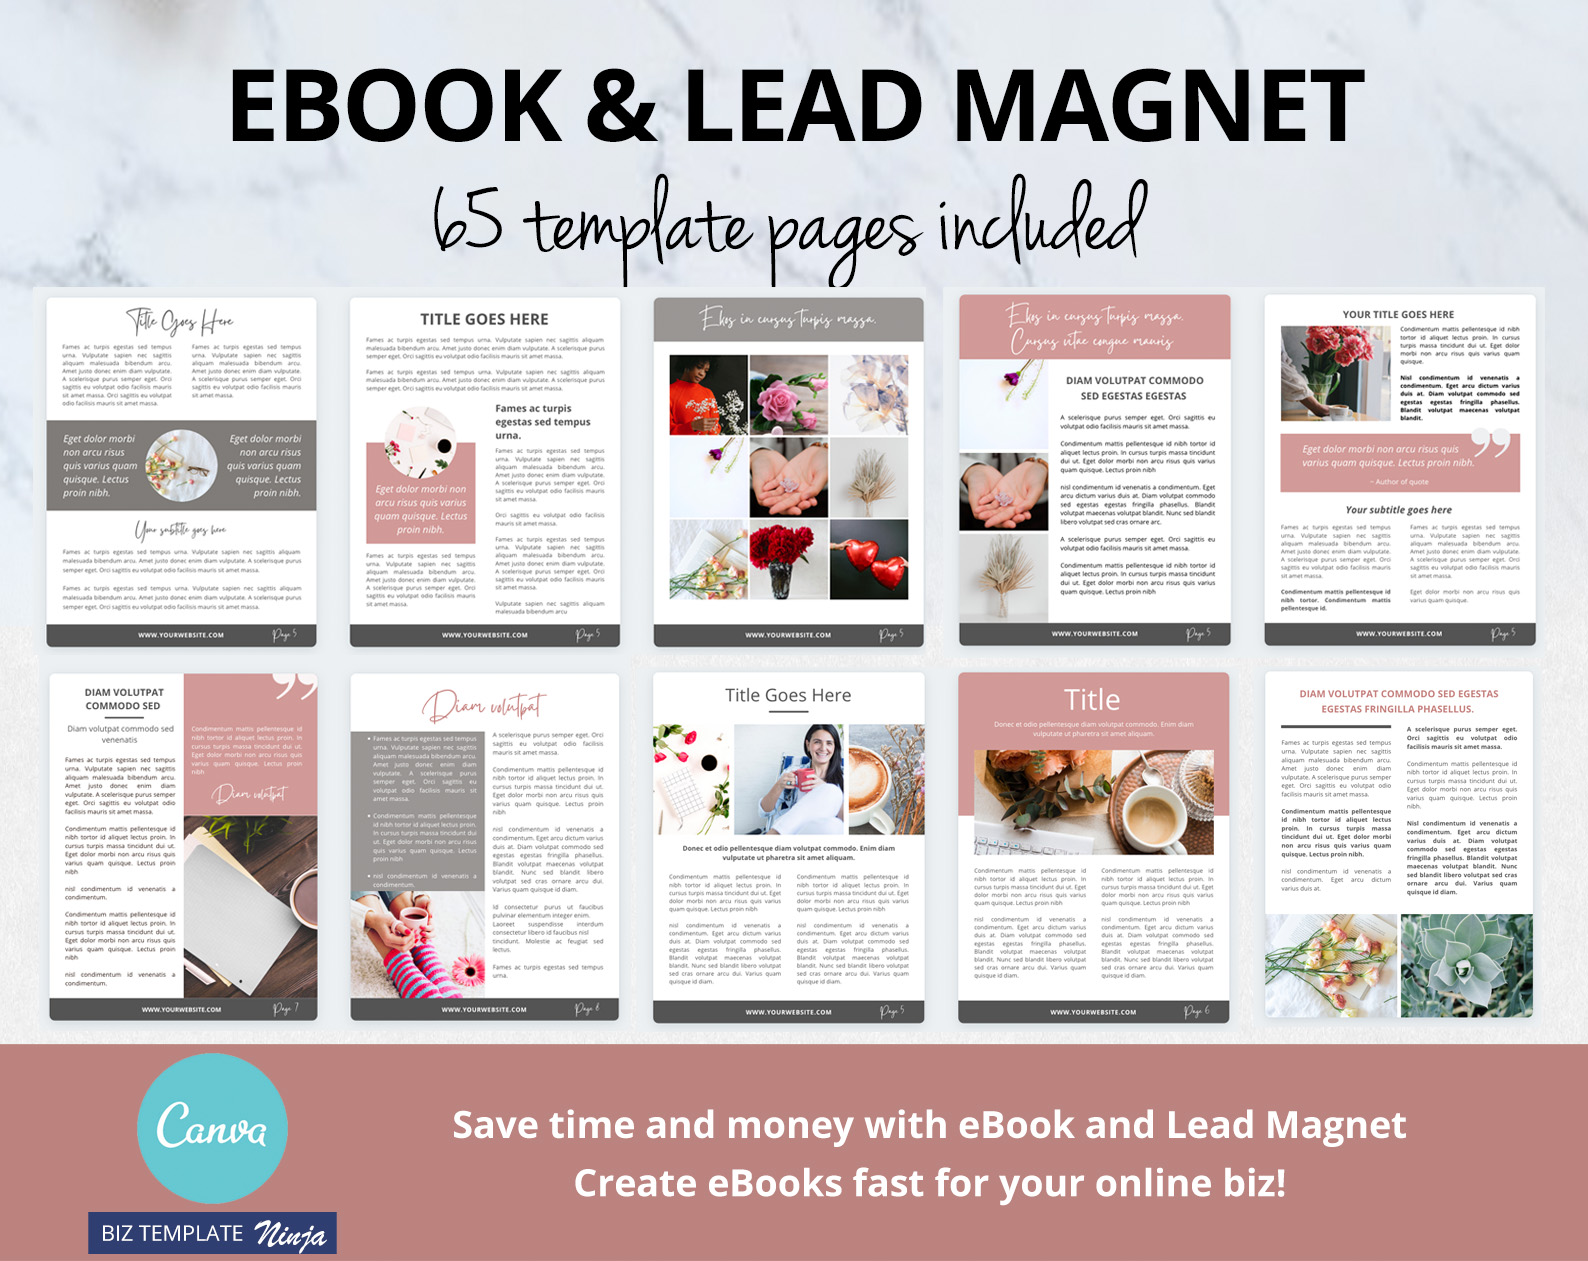 Ebook and lead magnet canva templates